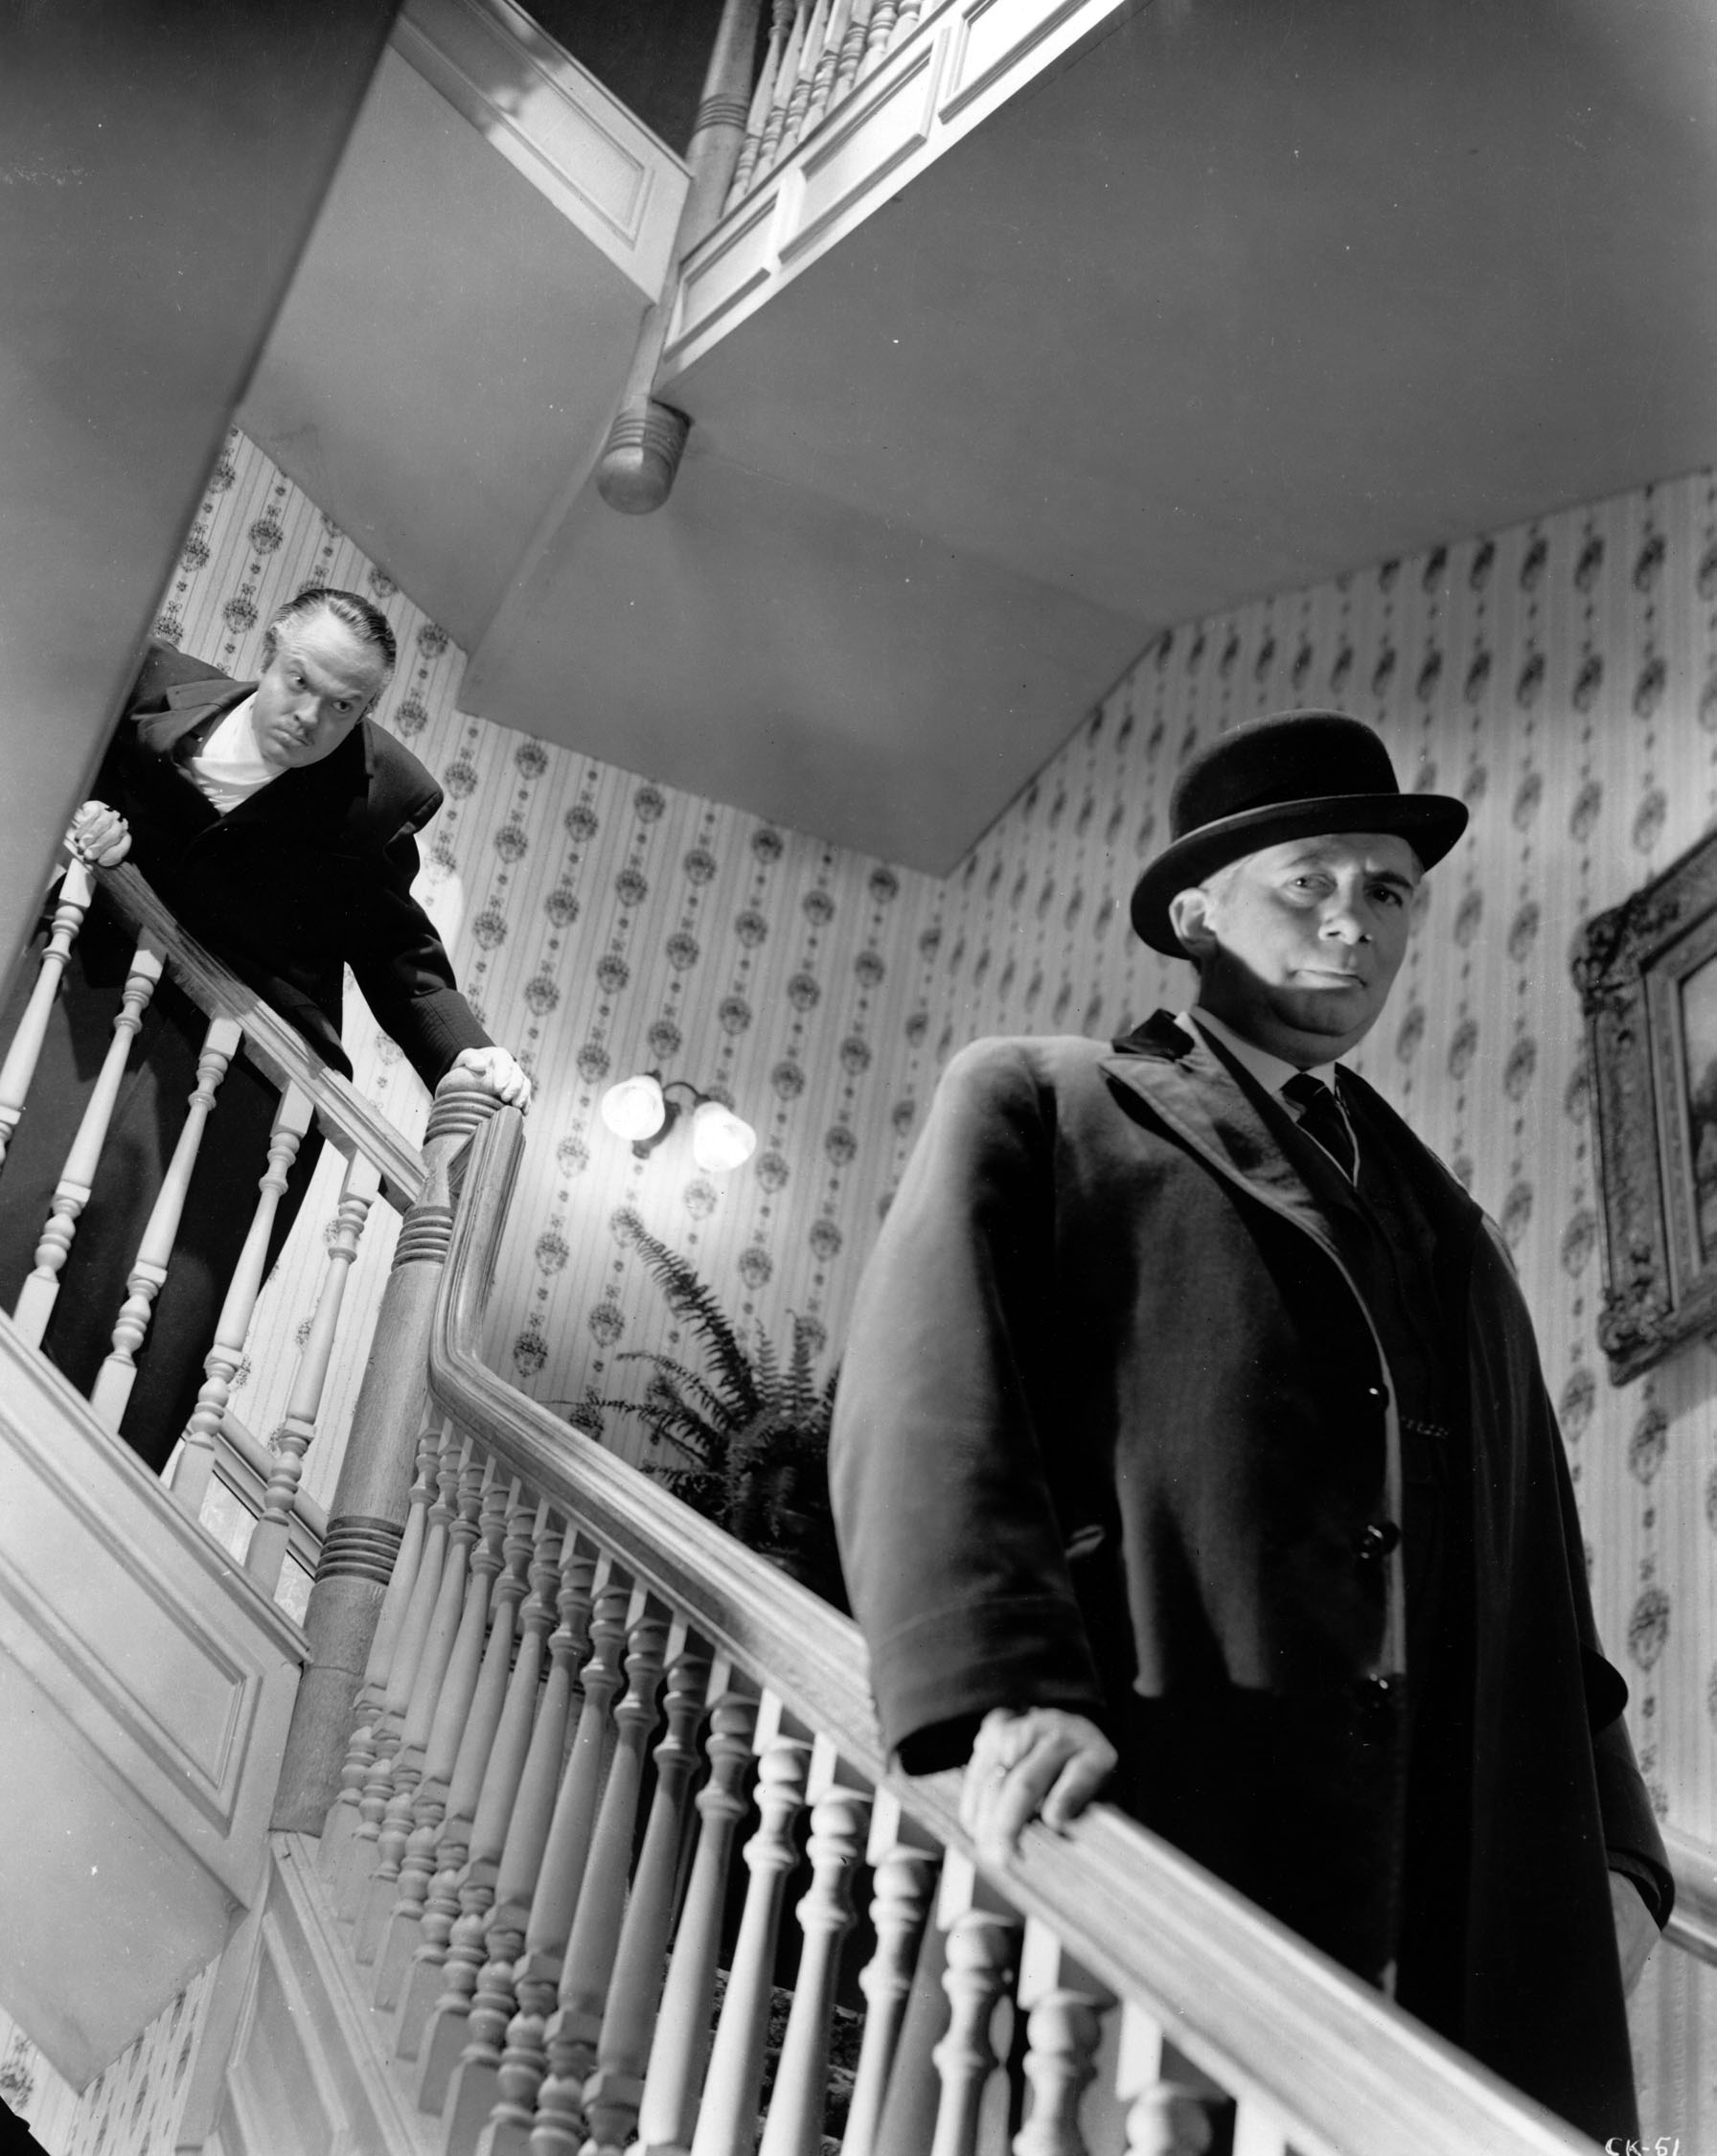 Orson Welles and Ray Collins in a still from Citizen Kane.